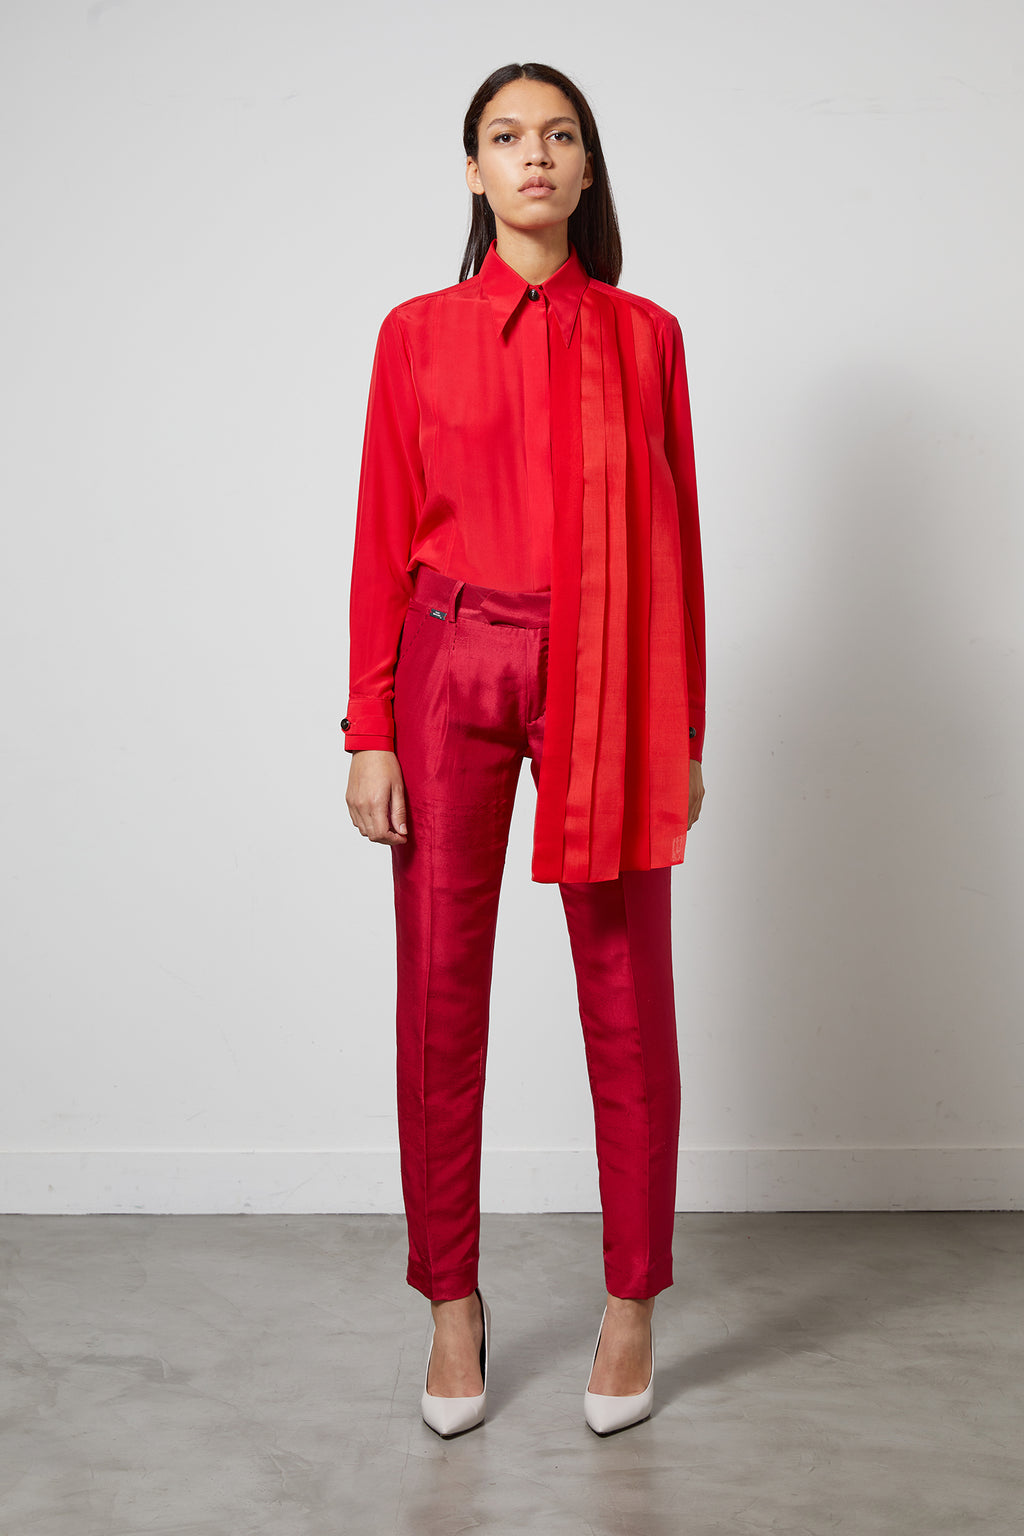 LUXEMBOURG passion red pleated shirt silk